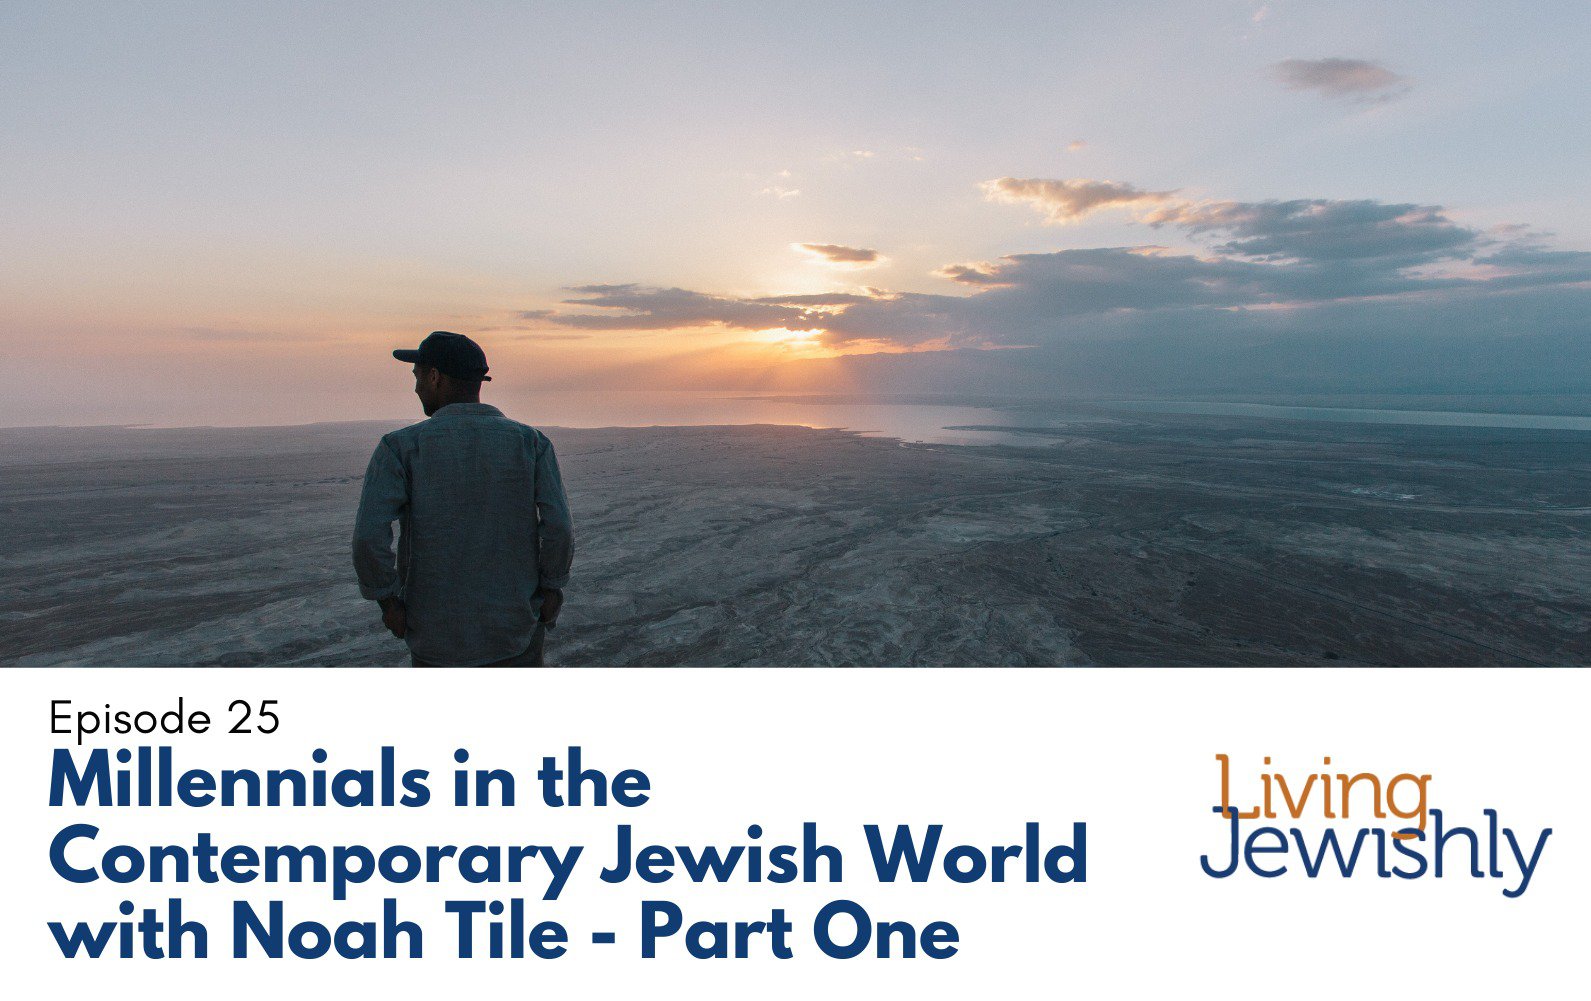 Millennials in the Contemporary Jewish World with Noah Tile - Part One